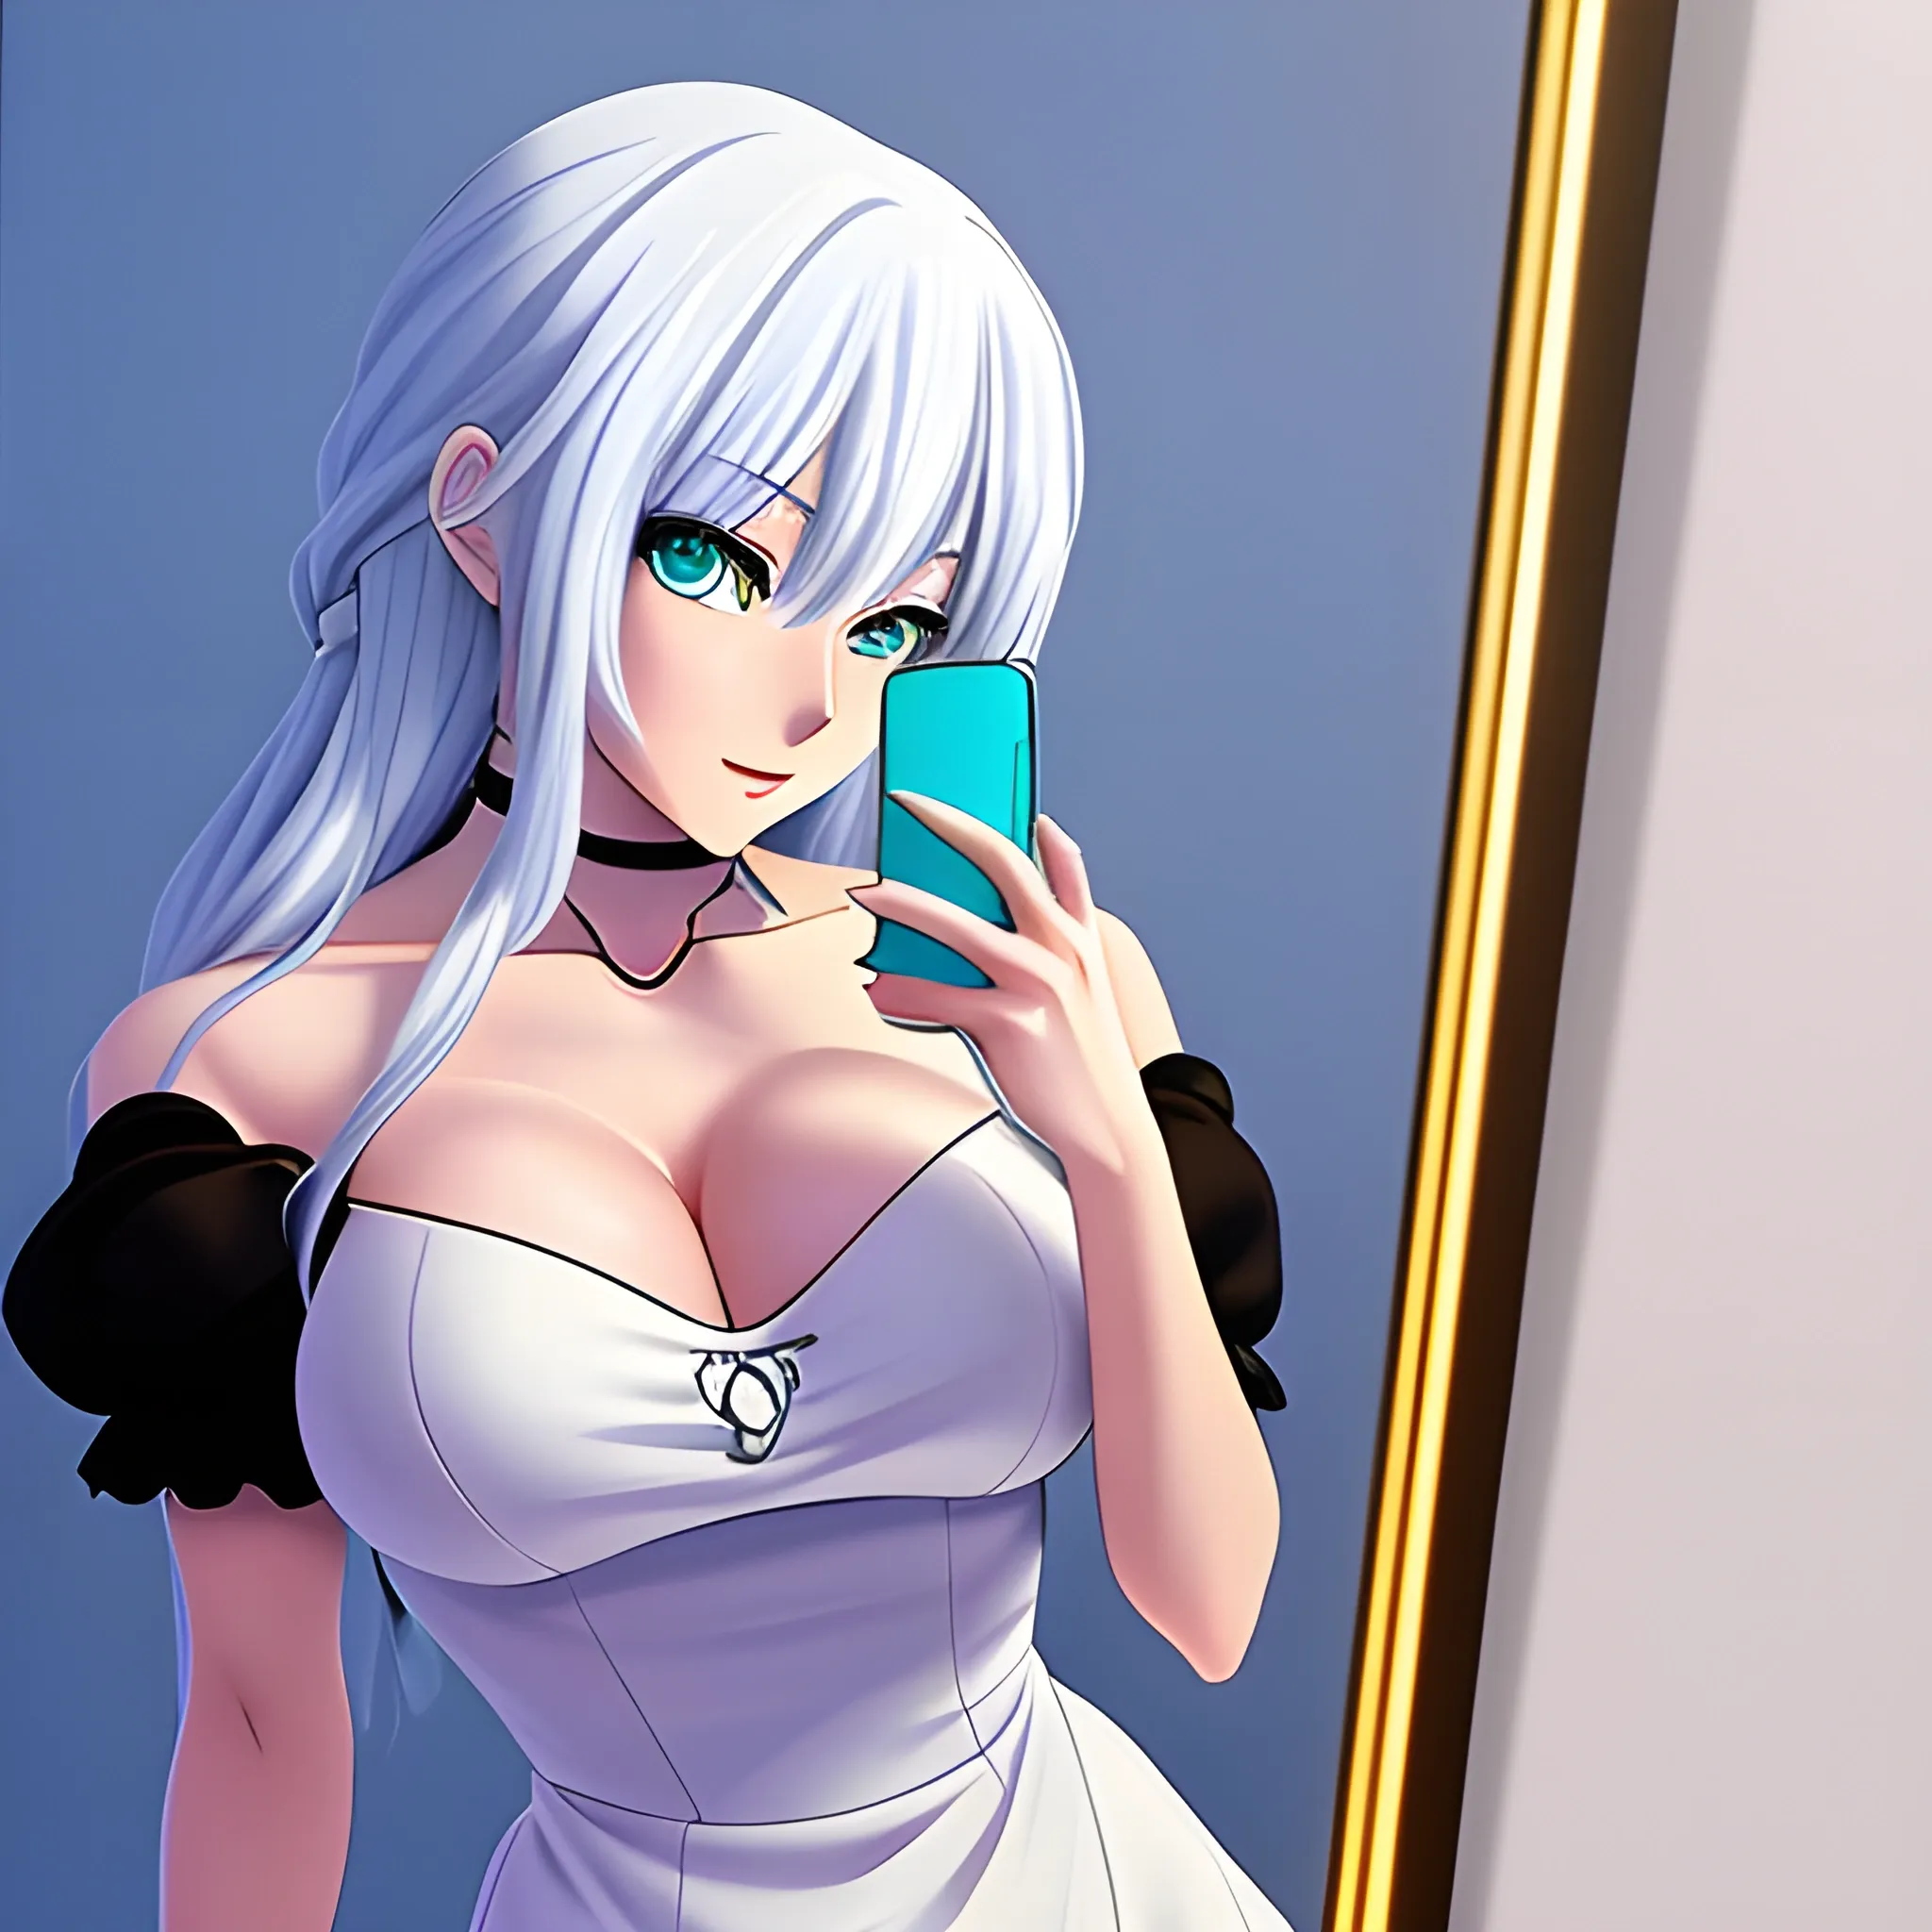 dale carpenter share anime girl looking in the mirror photos